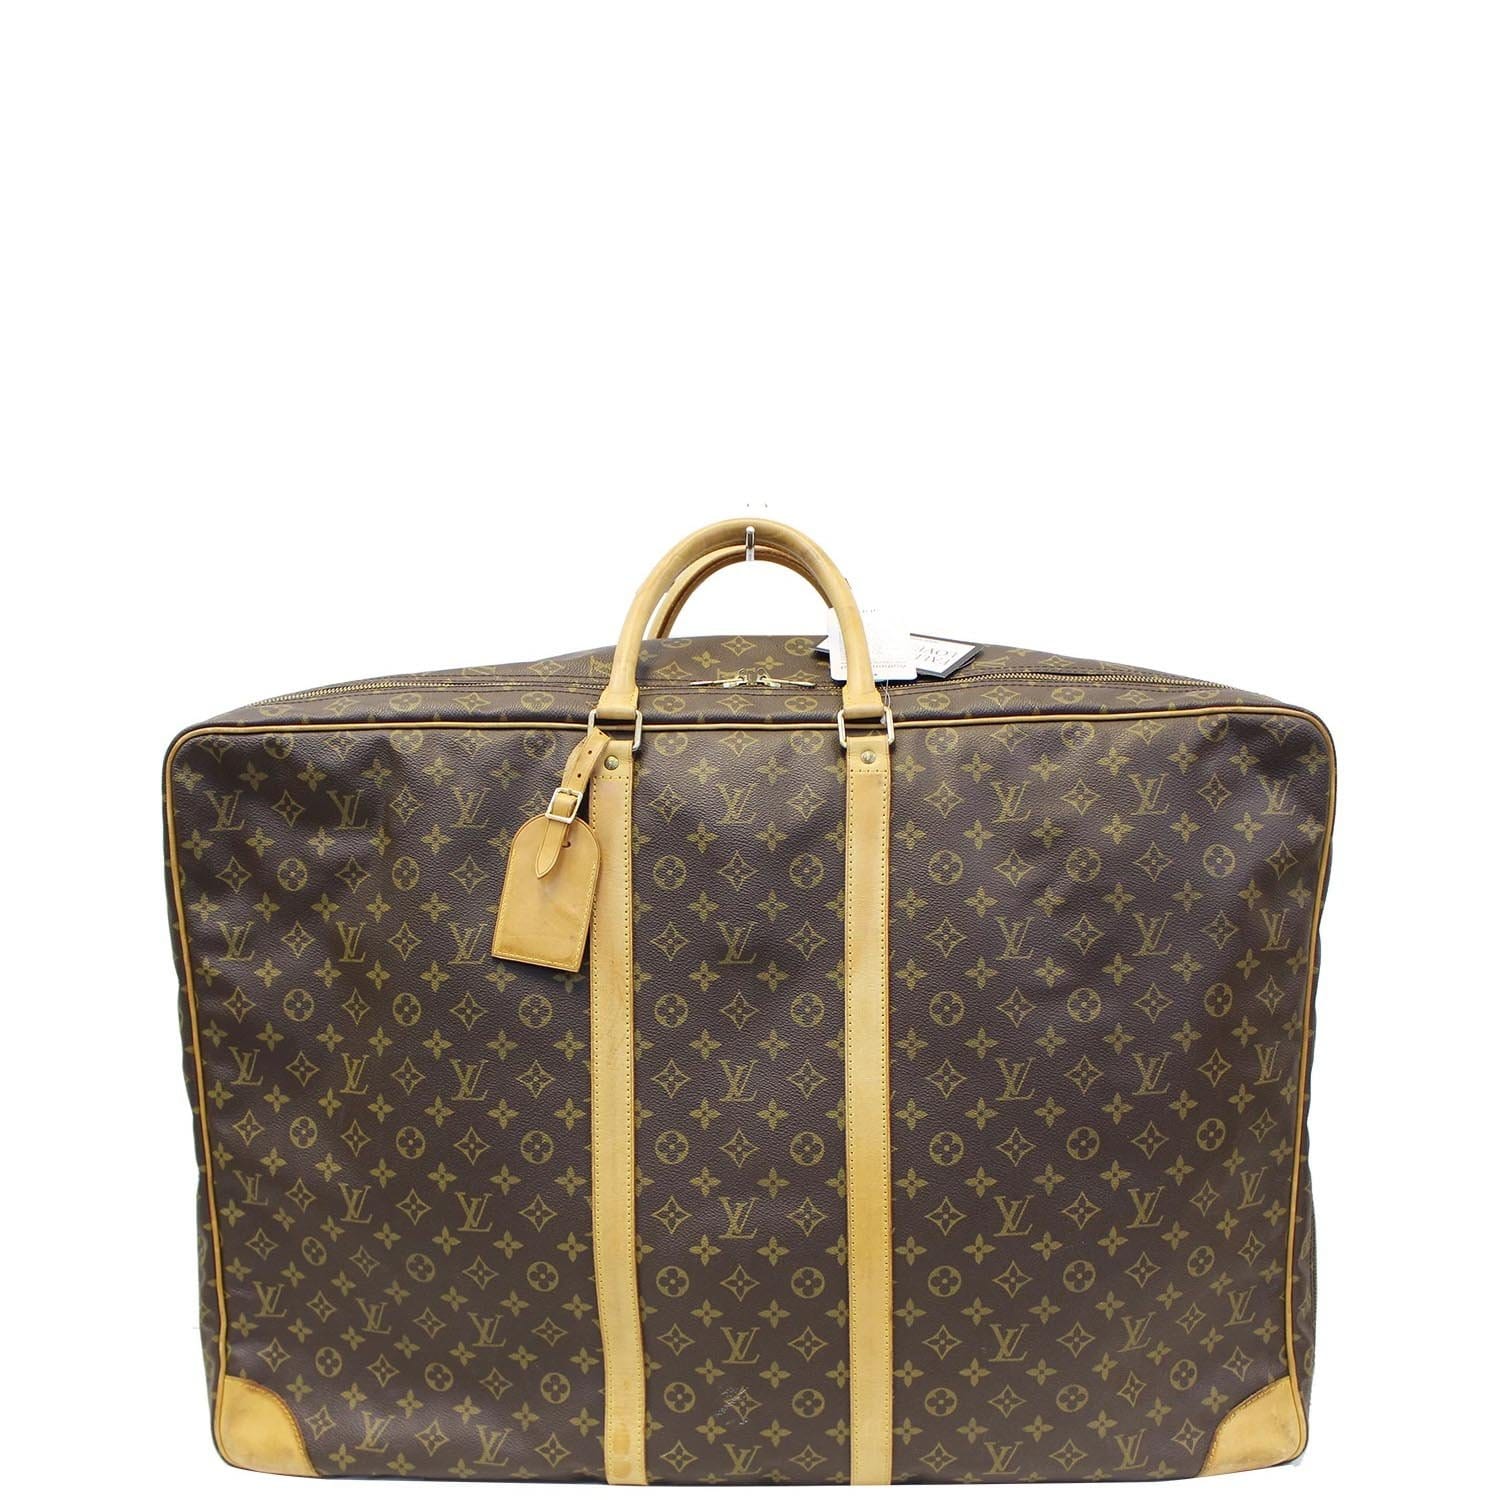 Louis Vuitton Sirius 70 Luggage Authentic French Vintage for Sale